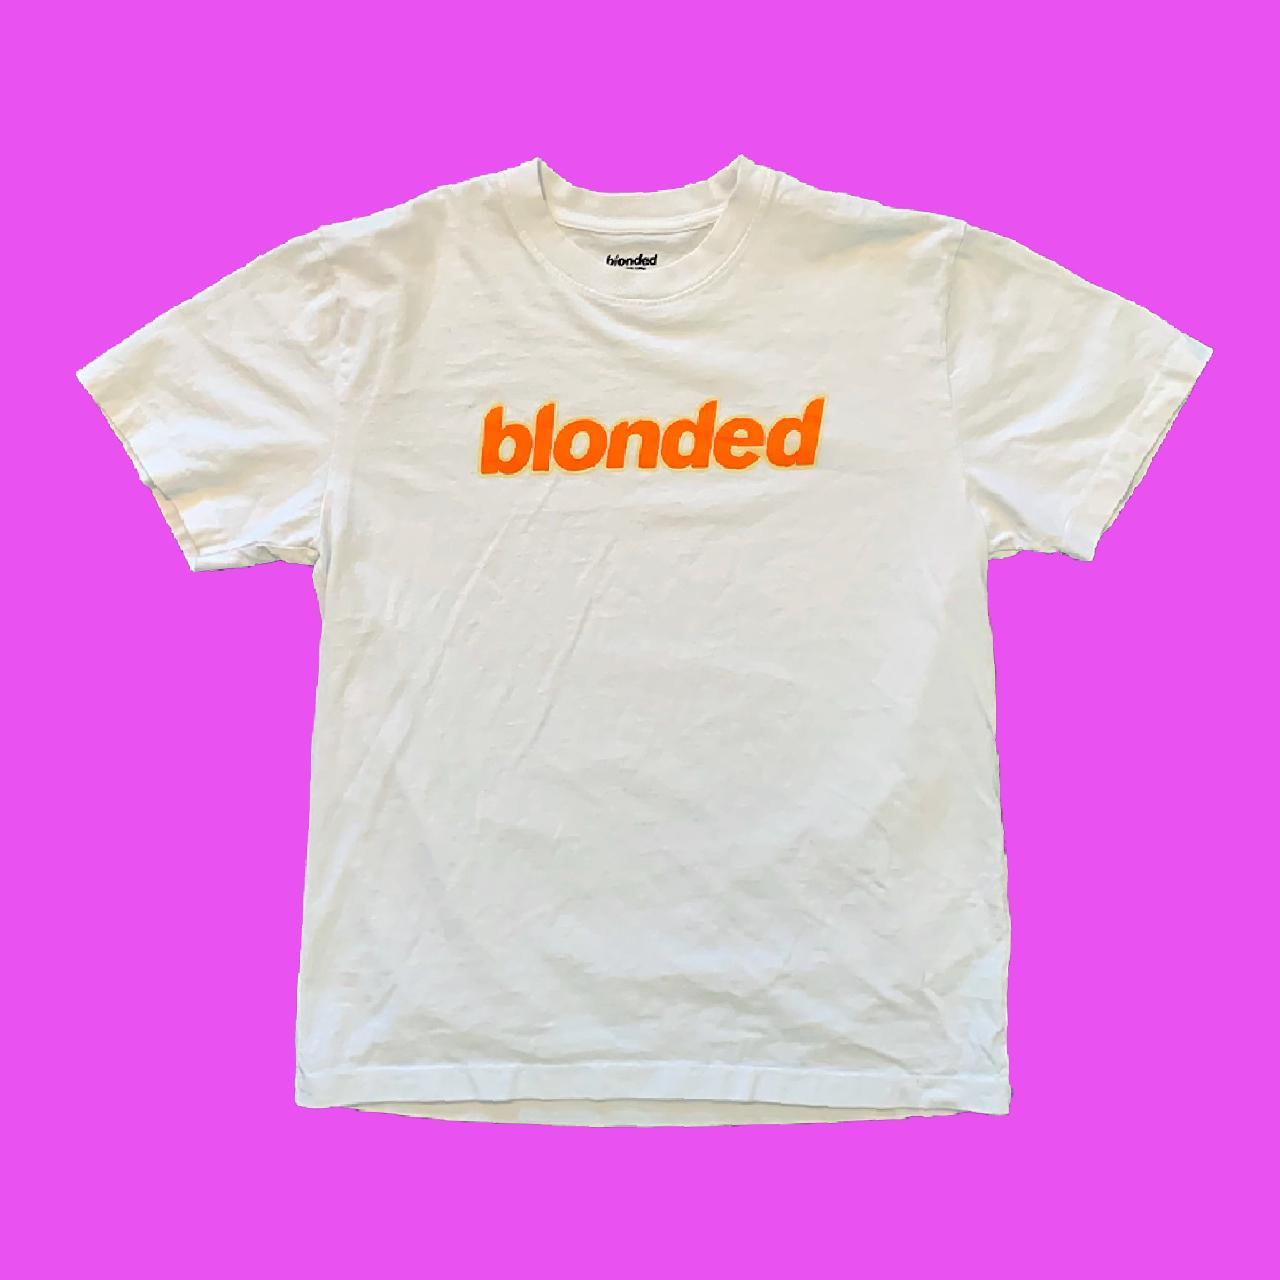 BLONDED Men's Fashion Graphic Print Merch by Frank Ocean PrEP T